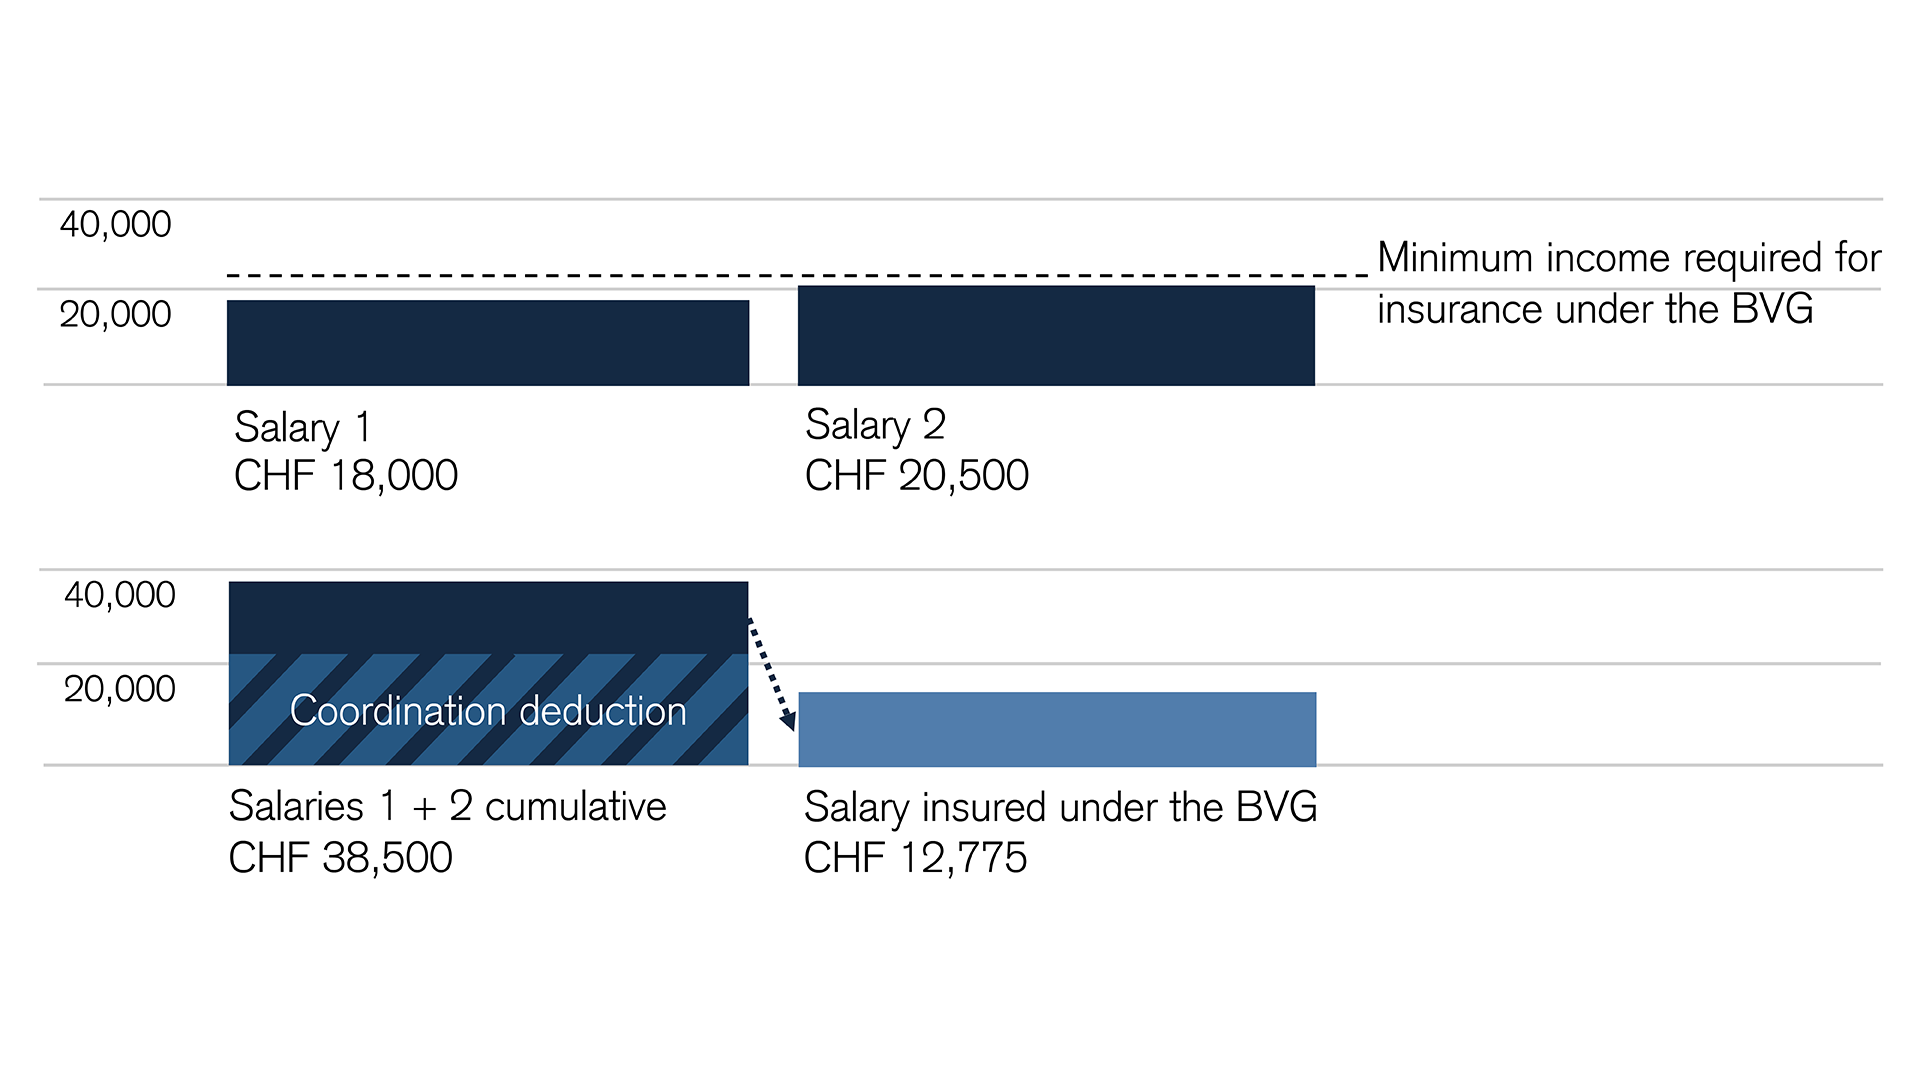 Sample calculation: Two salaries, both below the BVG minimum income required for enrollment